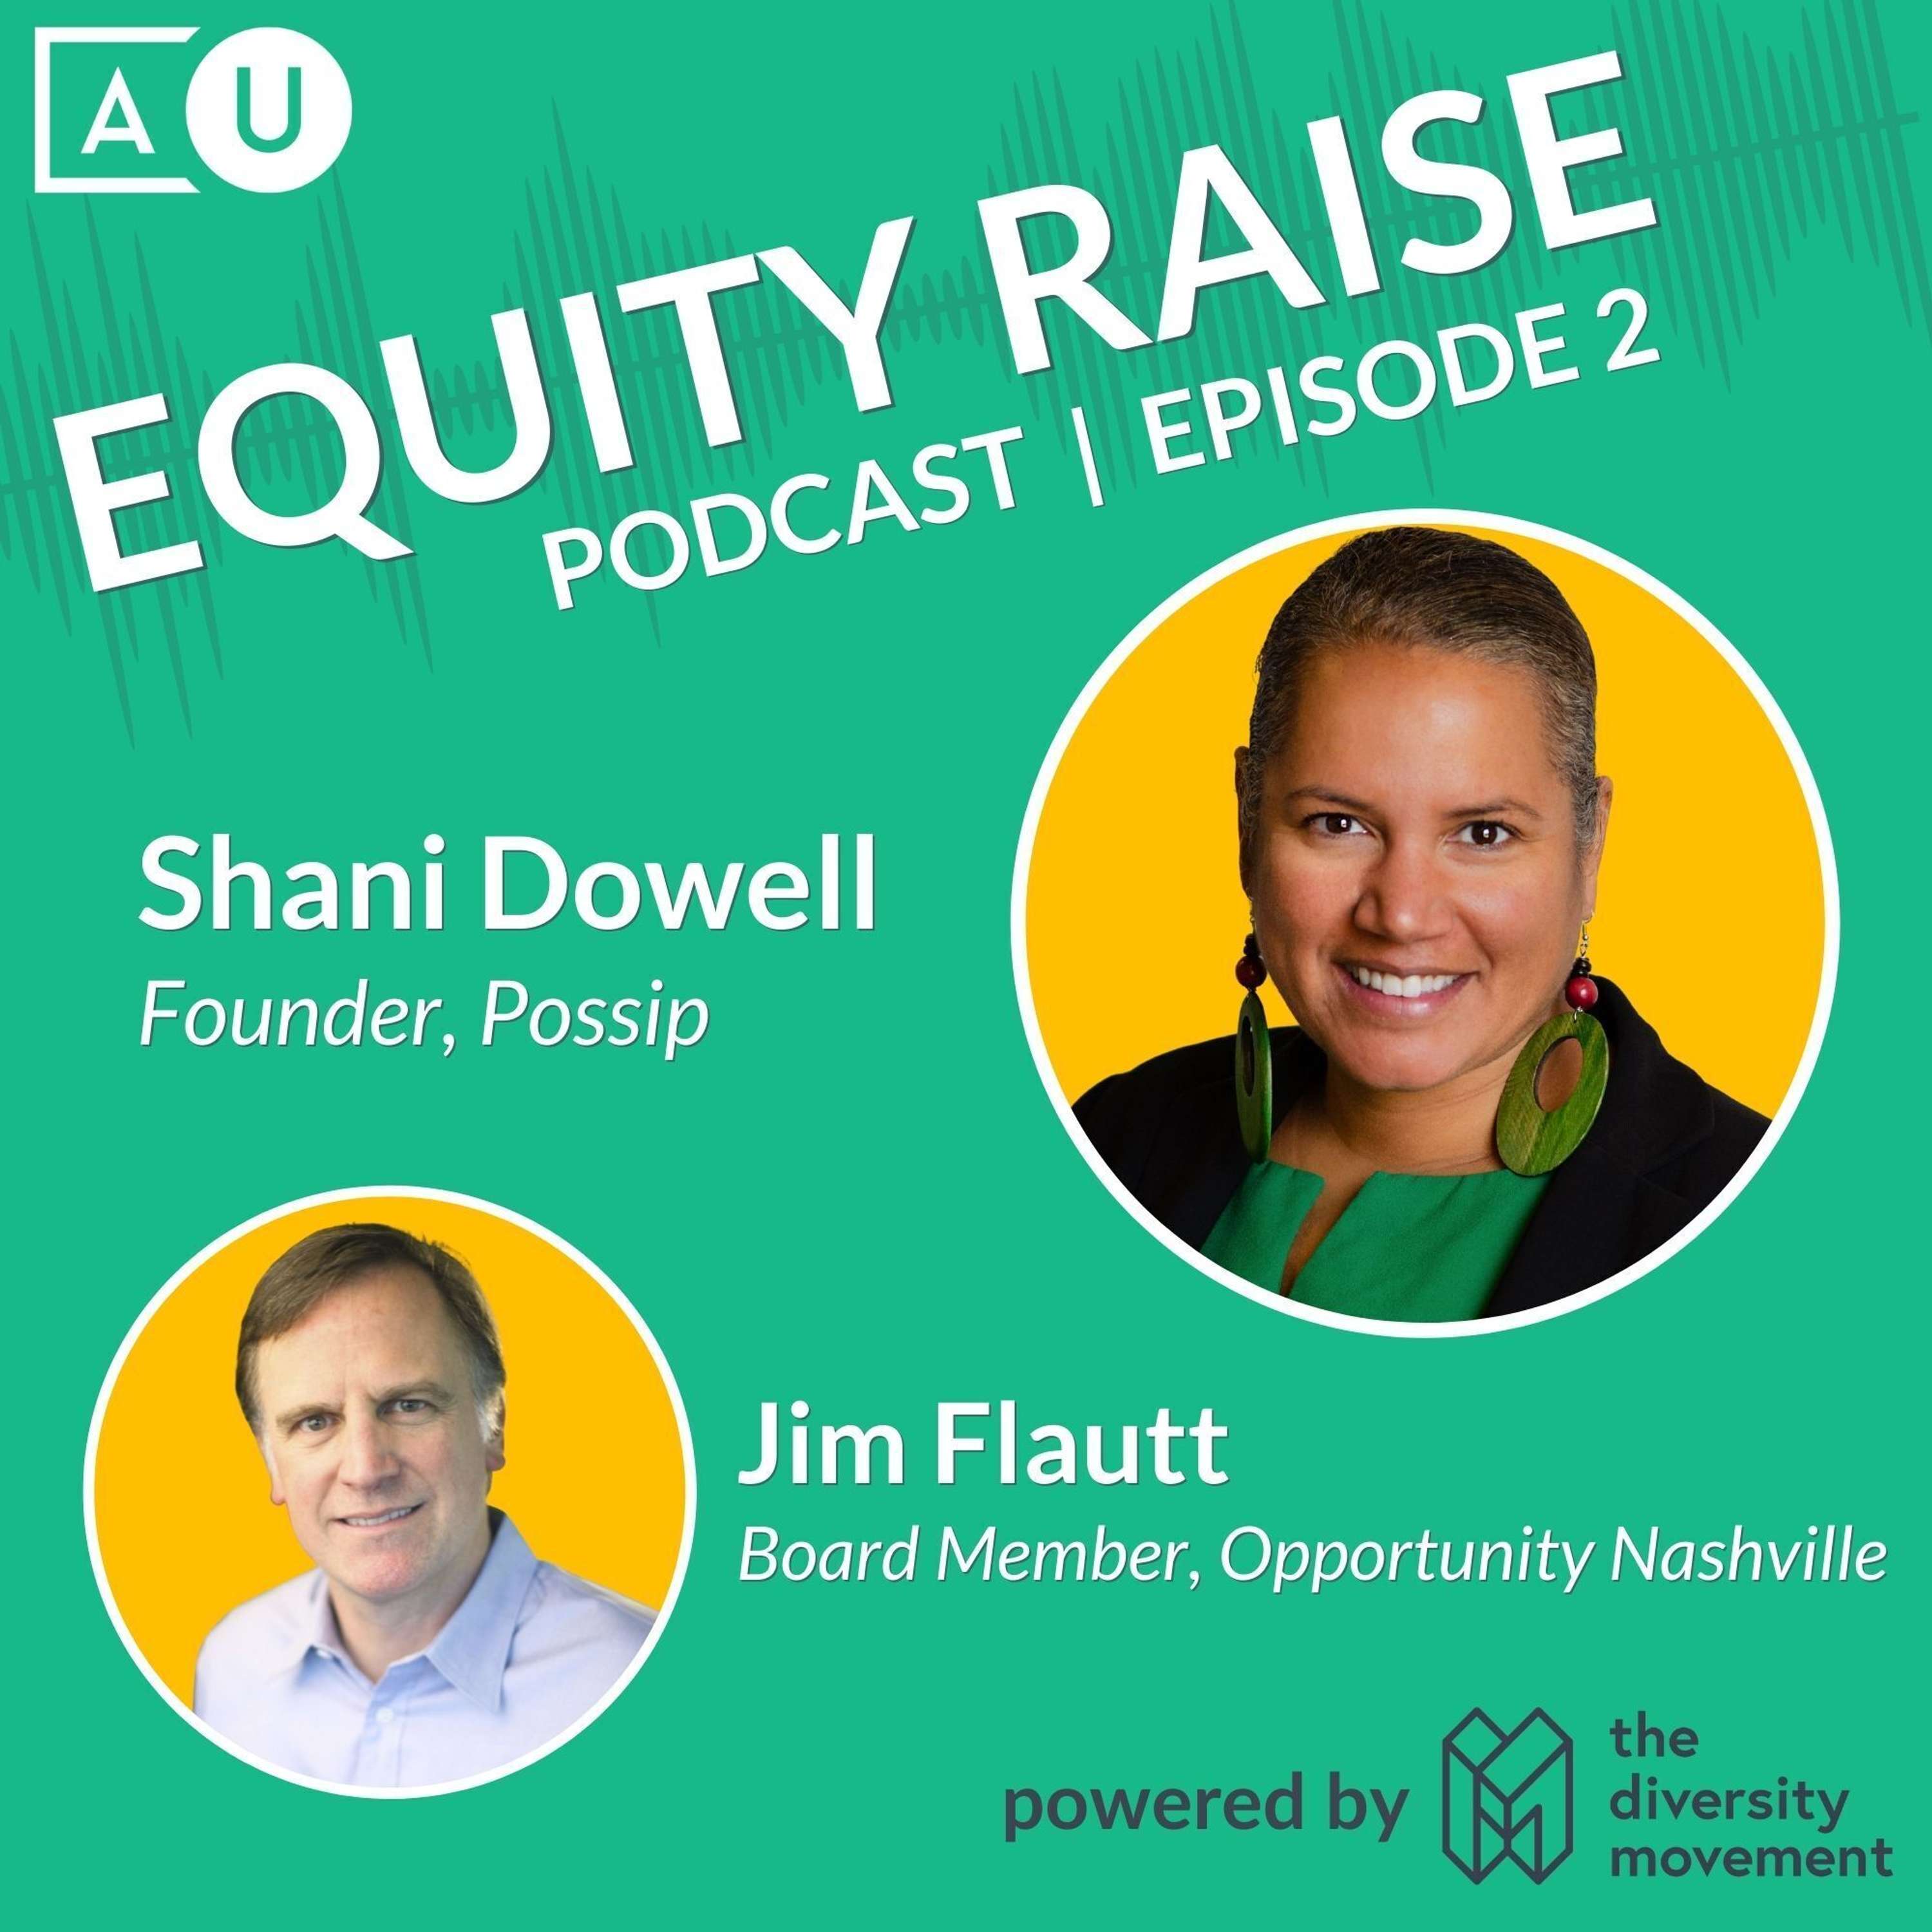 Finding the right funding: Shani Dowell (Possip) and Jim Flautt (Opportunity Nashville)